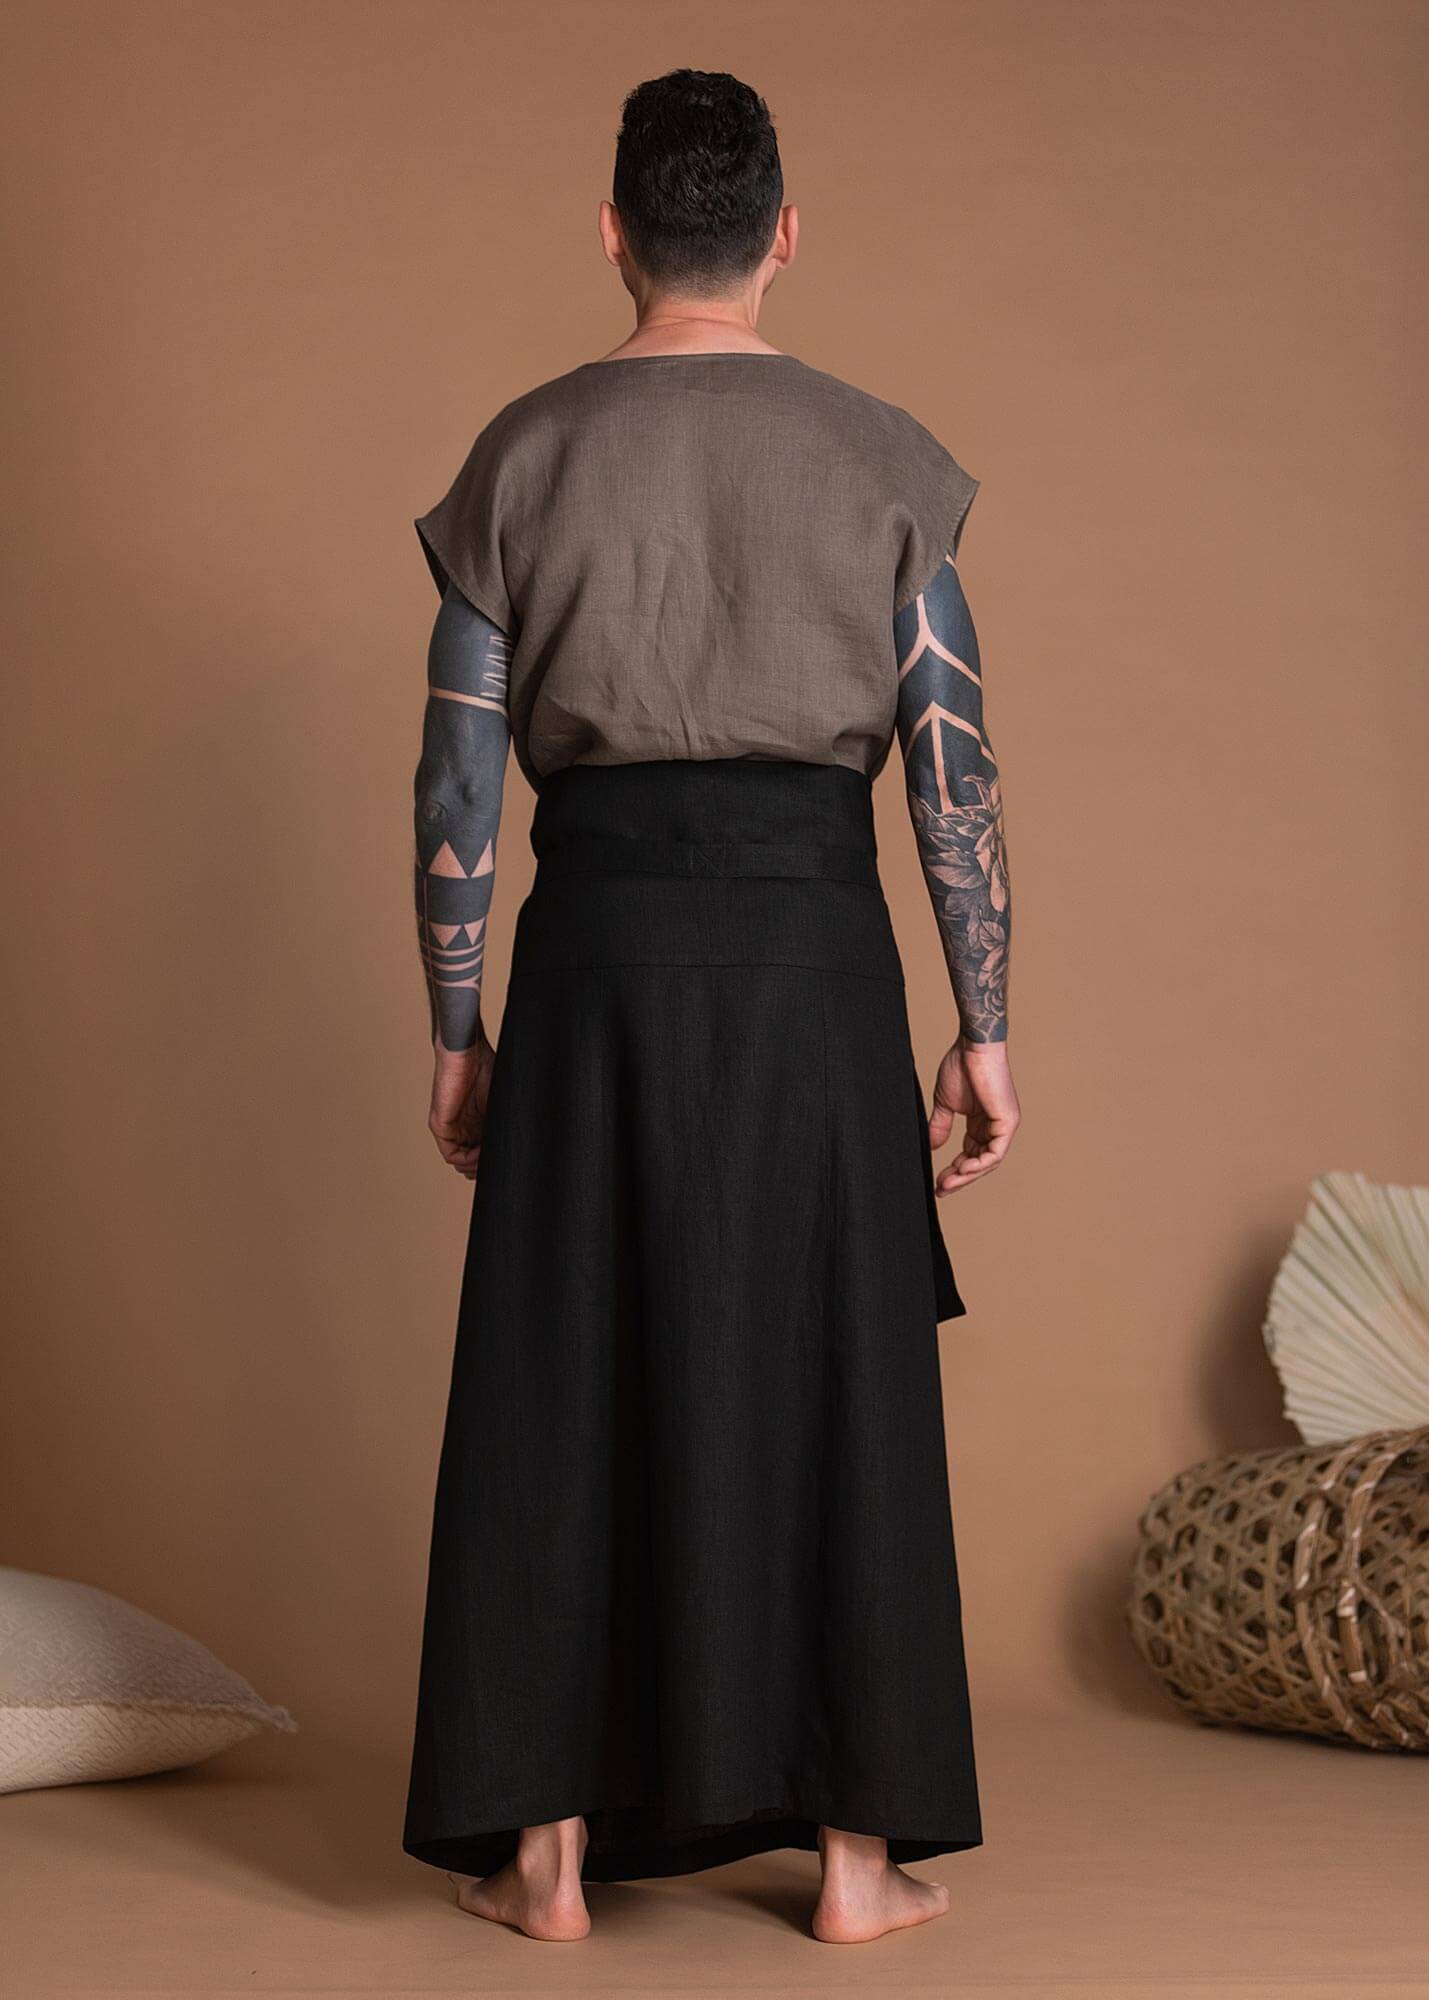 Black Long Flax Skirt With A Belt For Men or Women